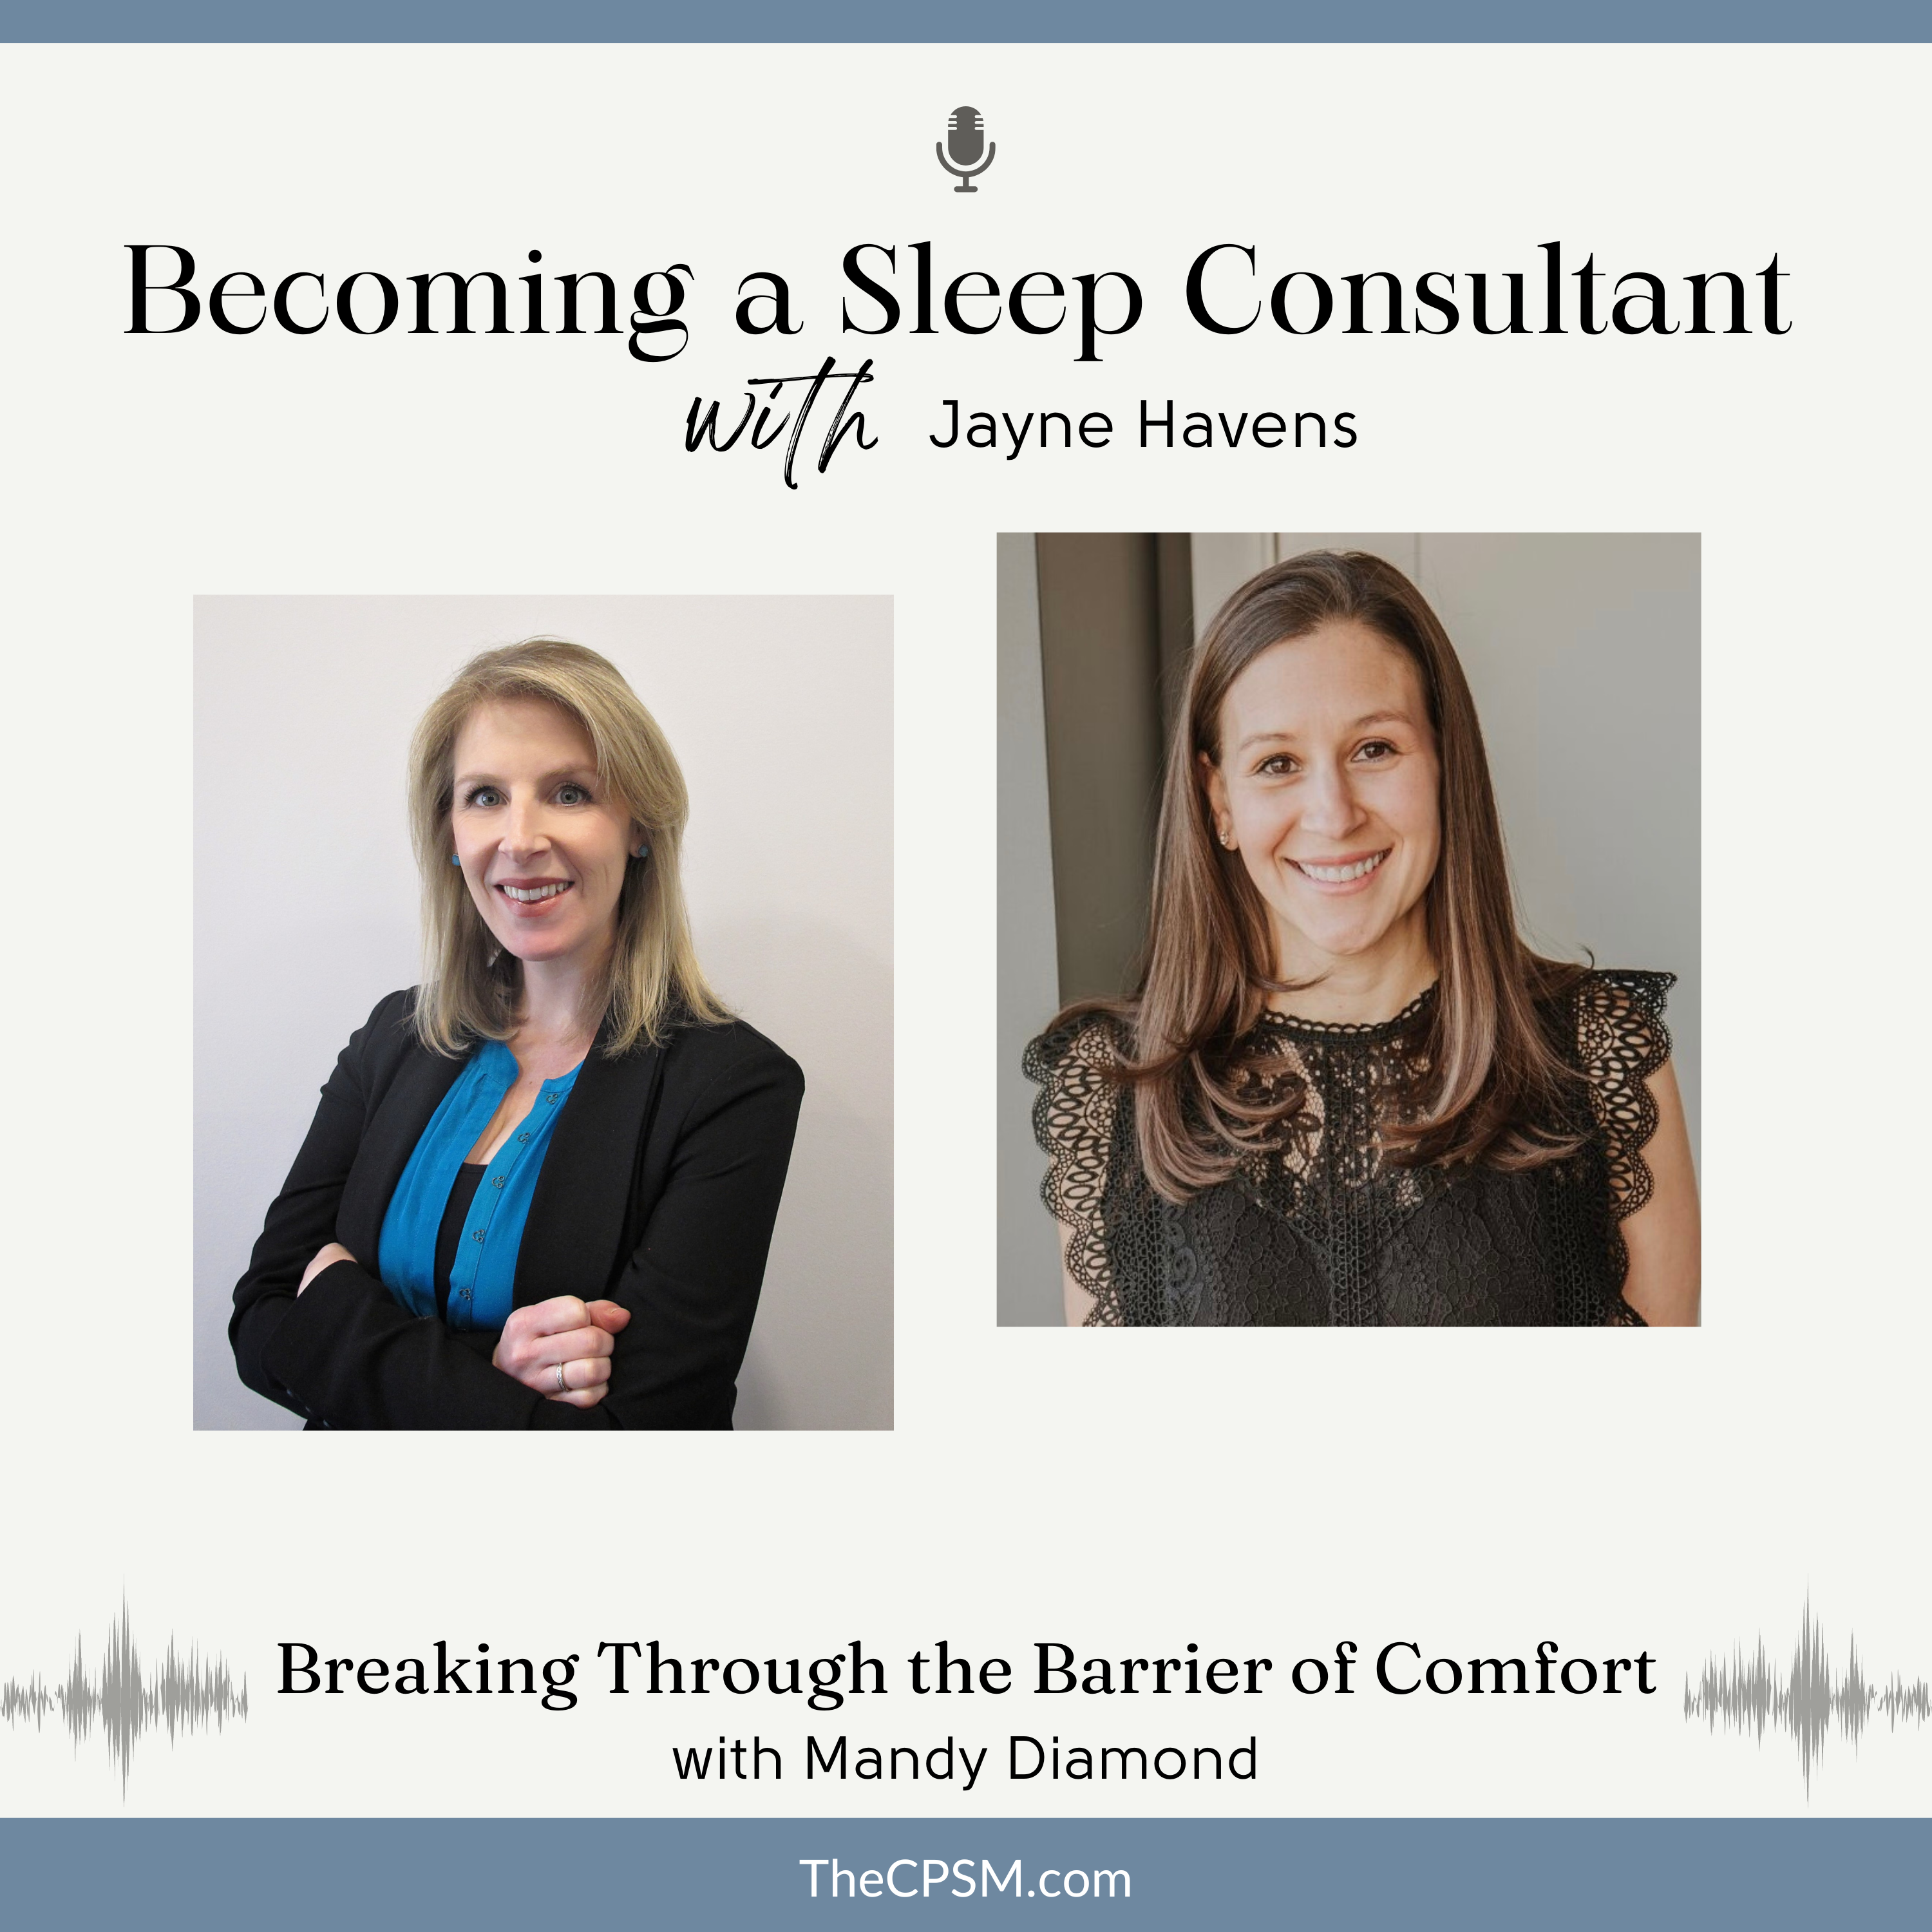 Breaking Through the Barrier of Comfort with Mandy Diamond